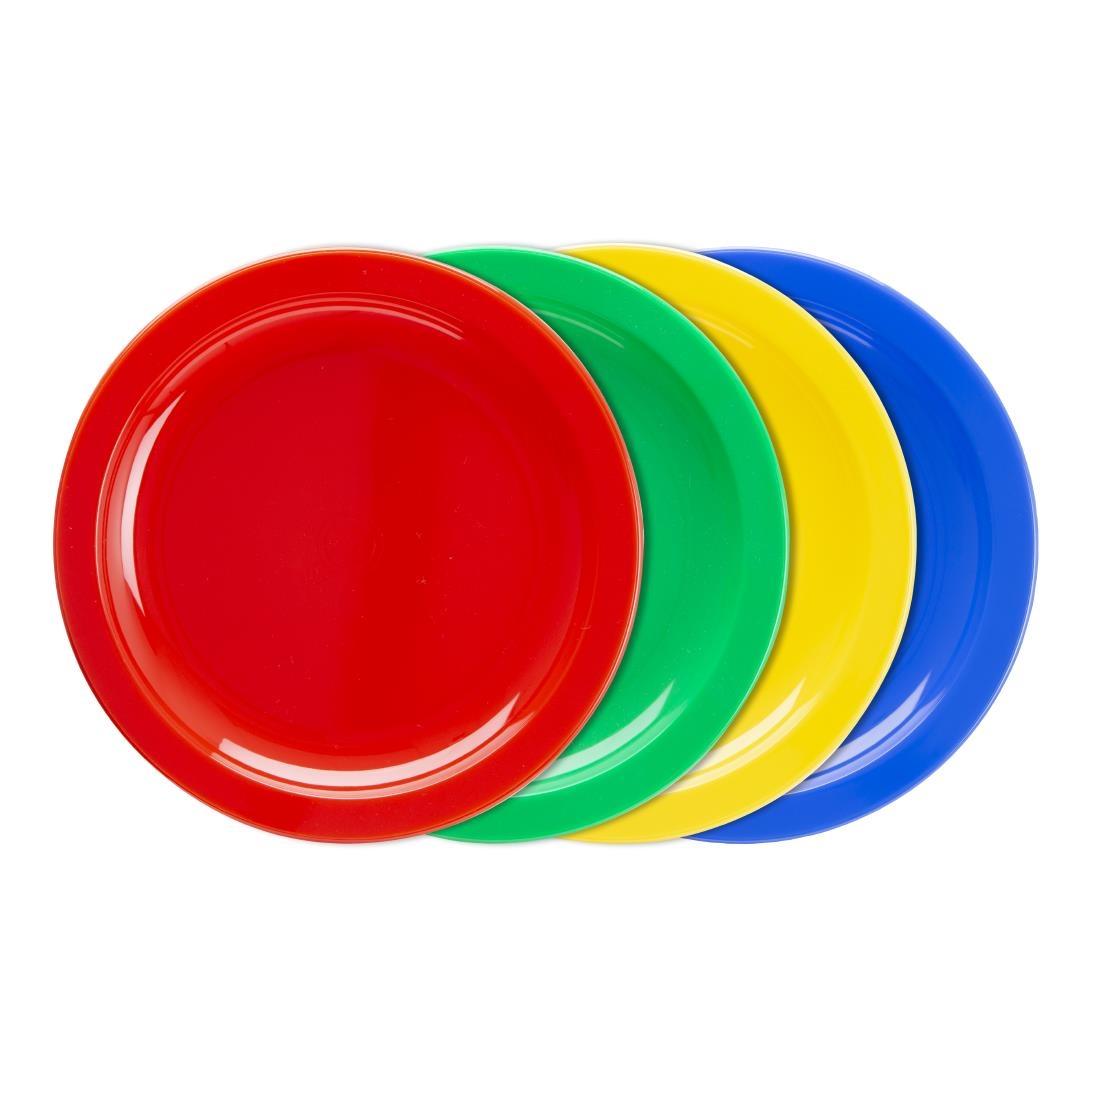 Olympia Kristallon Polycarbonate Plates Red 172mm (Pack of 12) - CB766  - 4